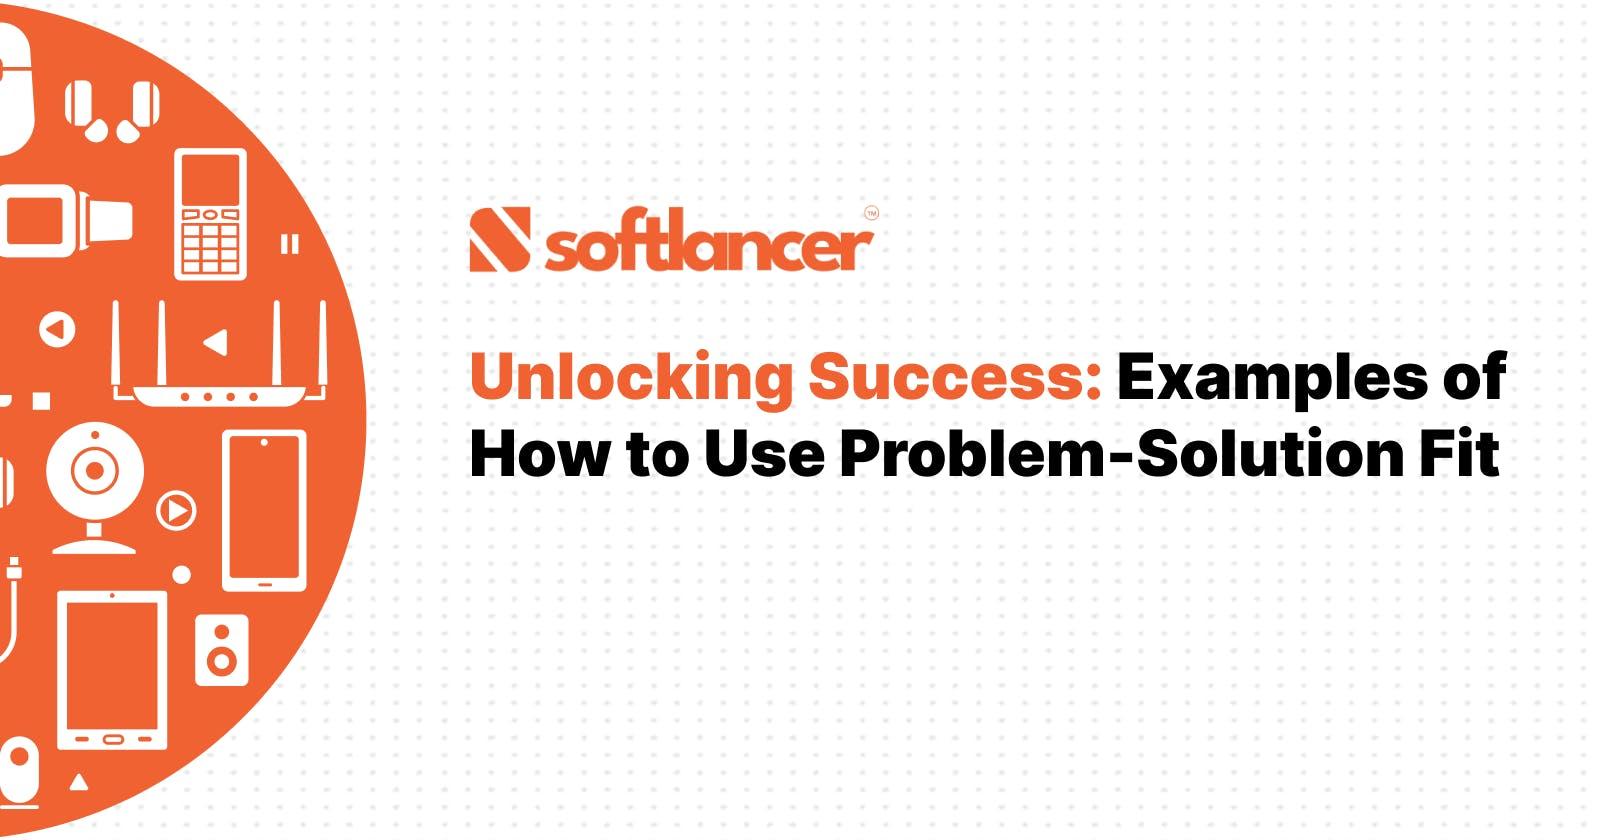 Unlocking Success: Examples of How to Use Problem-Solution Fit